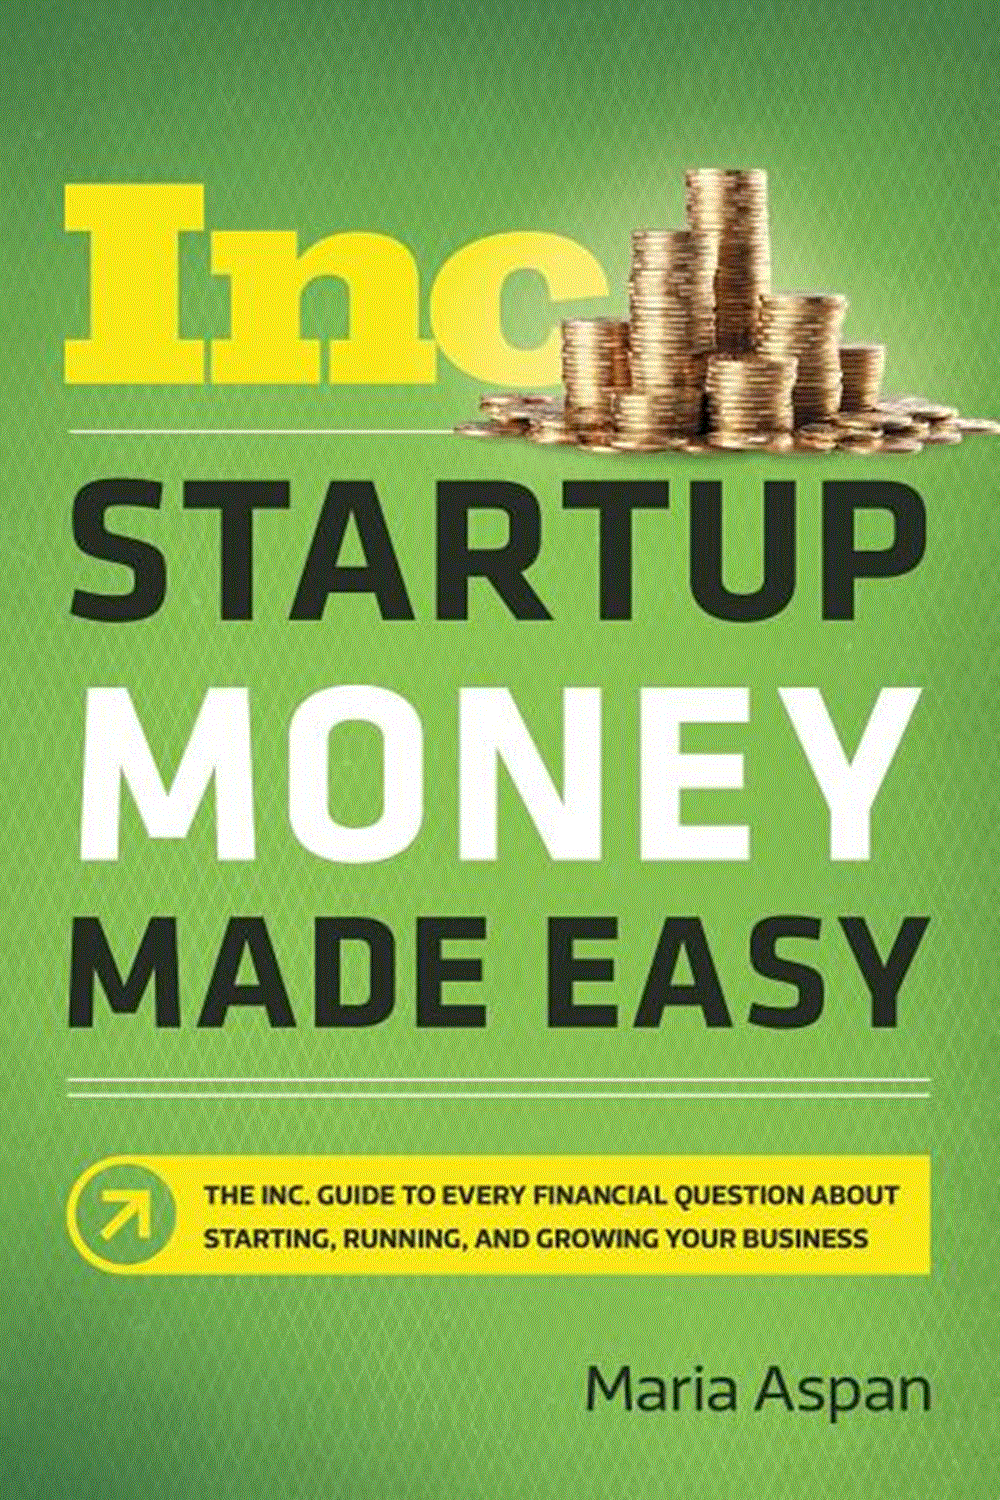 Startup Money Made Easy The Inc. Guide to Every Financial Question about Starting, Running, and Grow